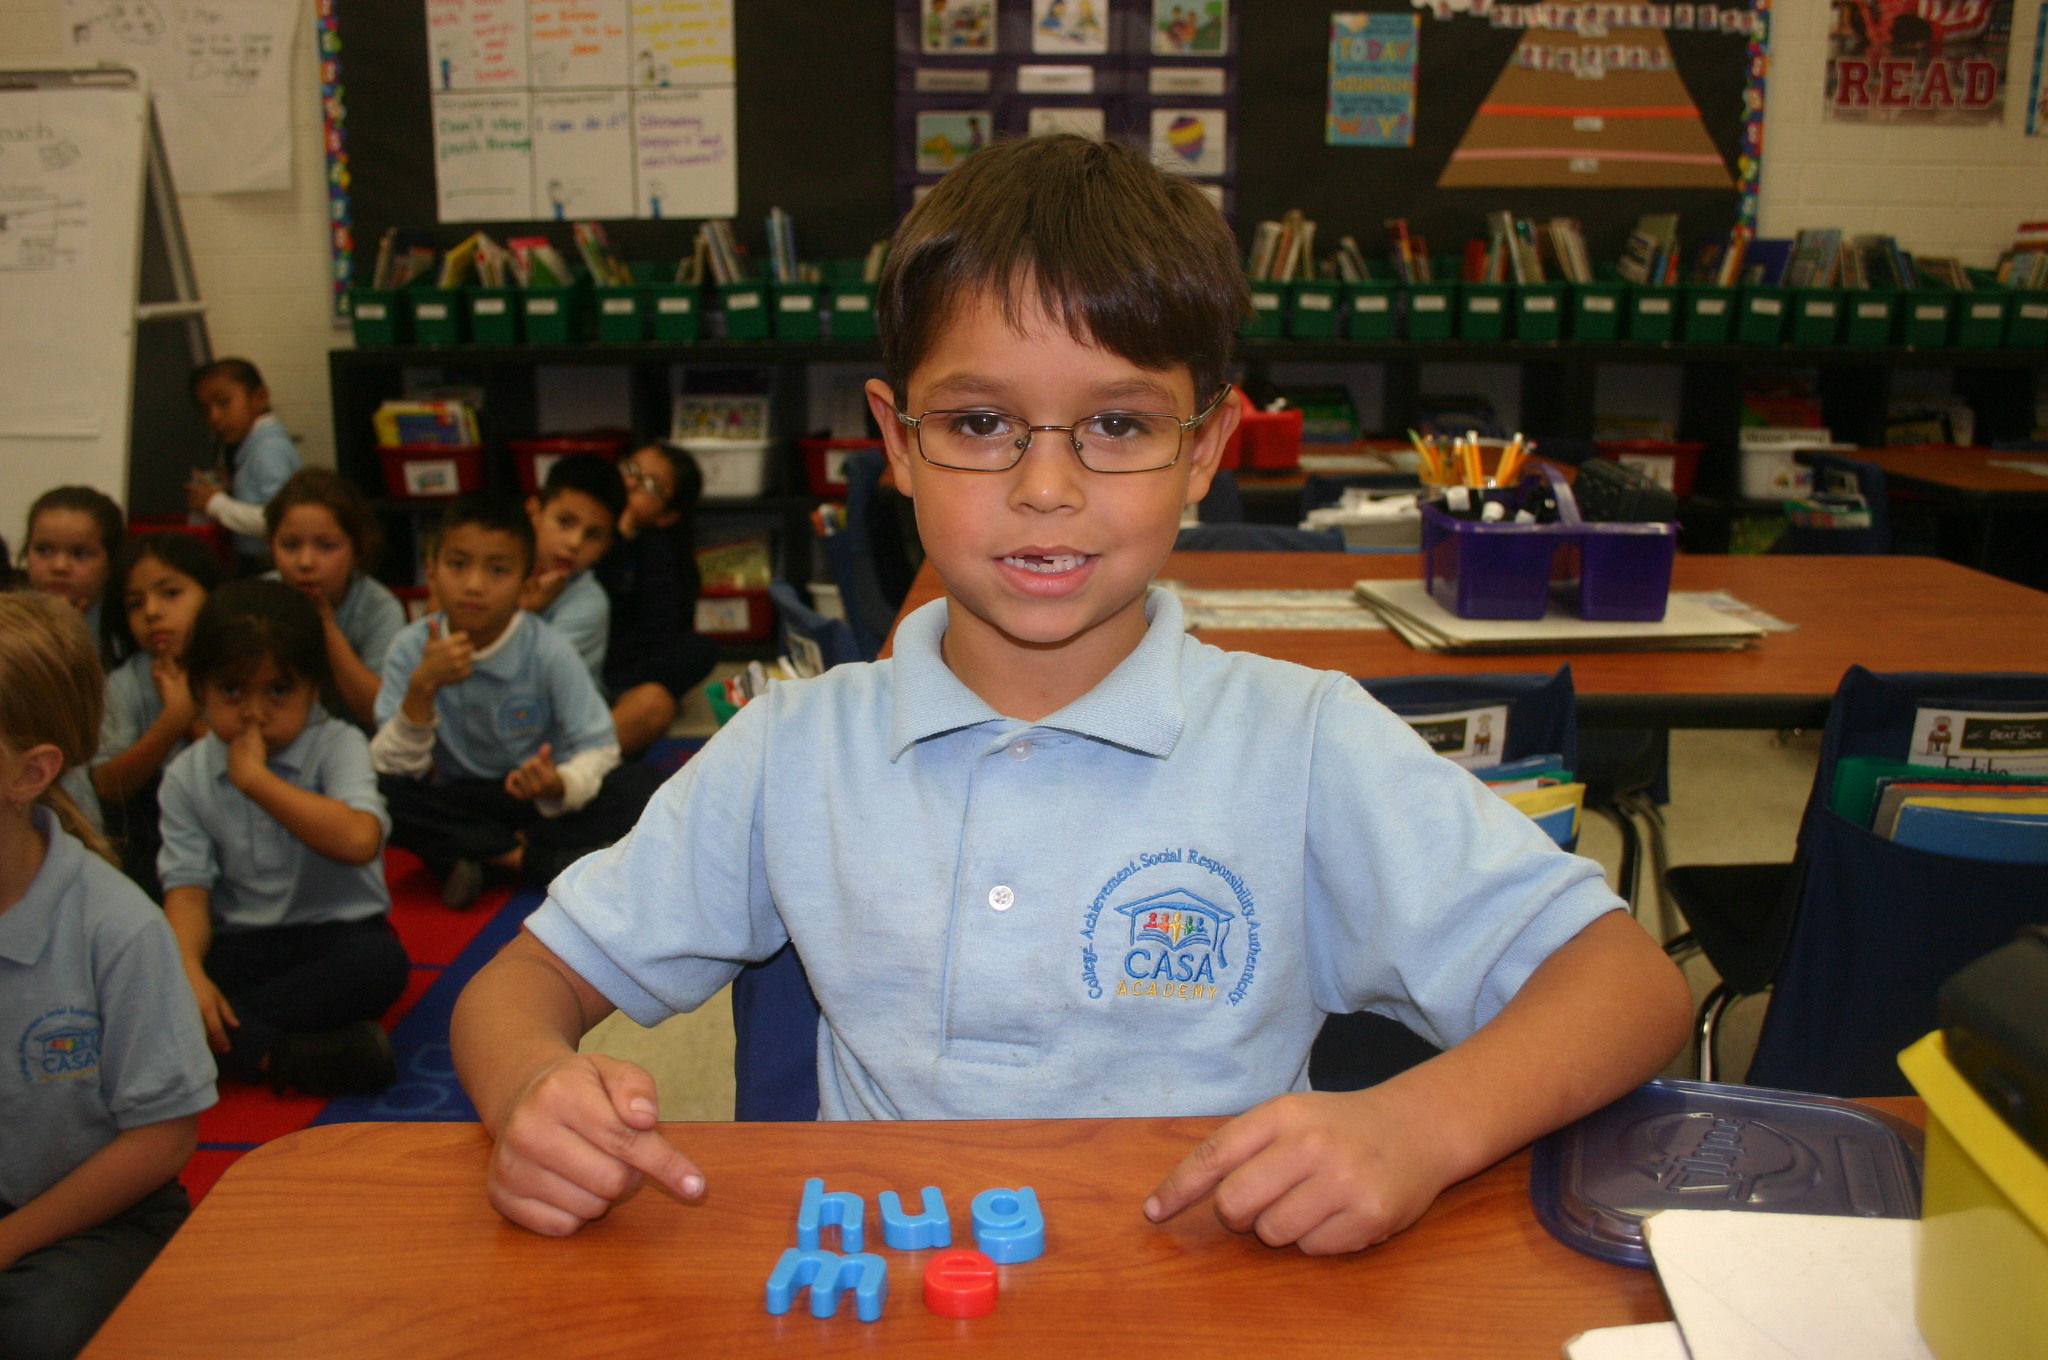 A CASA Academy scholar uses tools on his desk during a lesson.